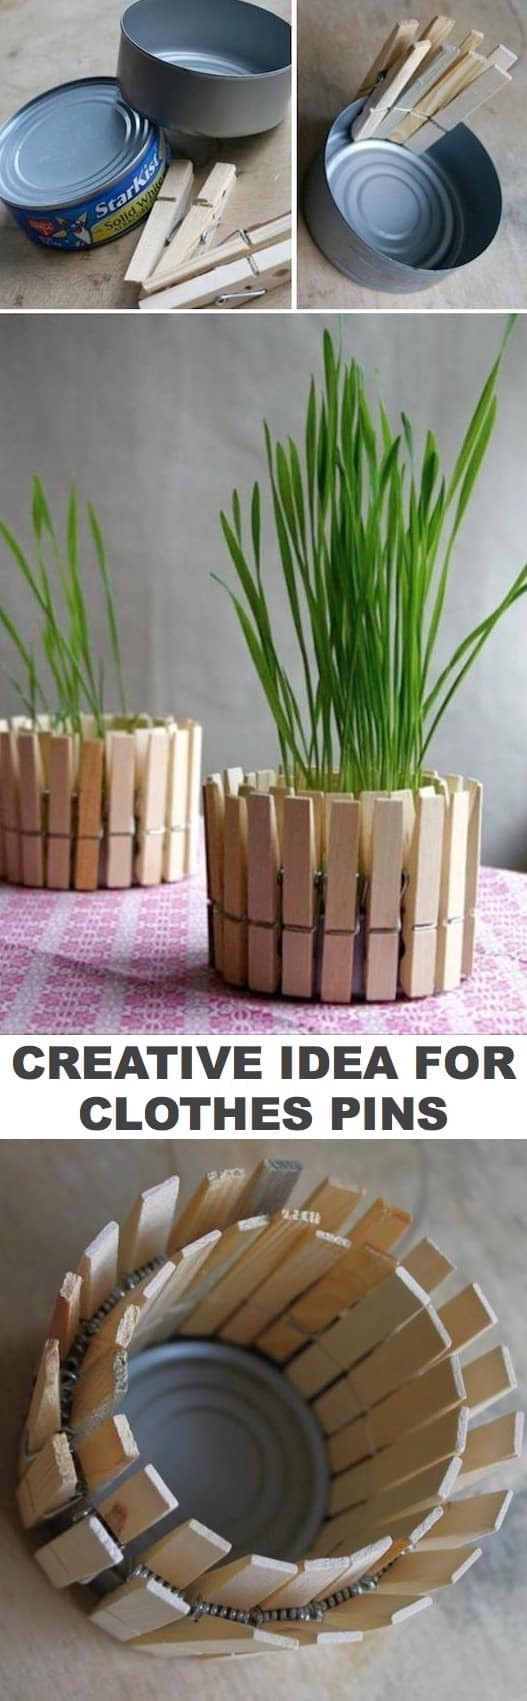 Craft Ideas For Adults
 10 Creative Craft Ideas For Adults Abundator